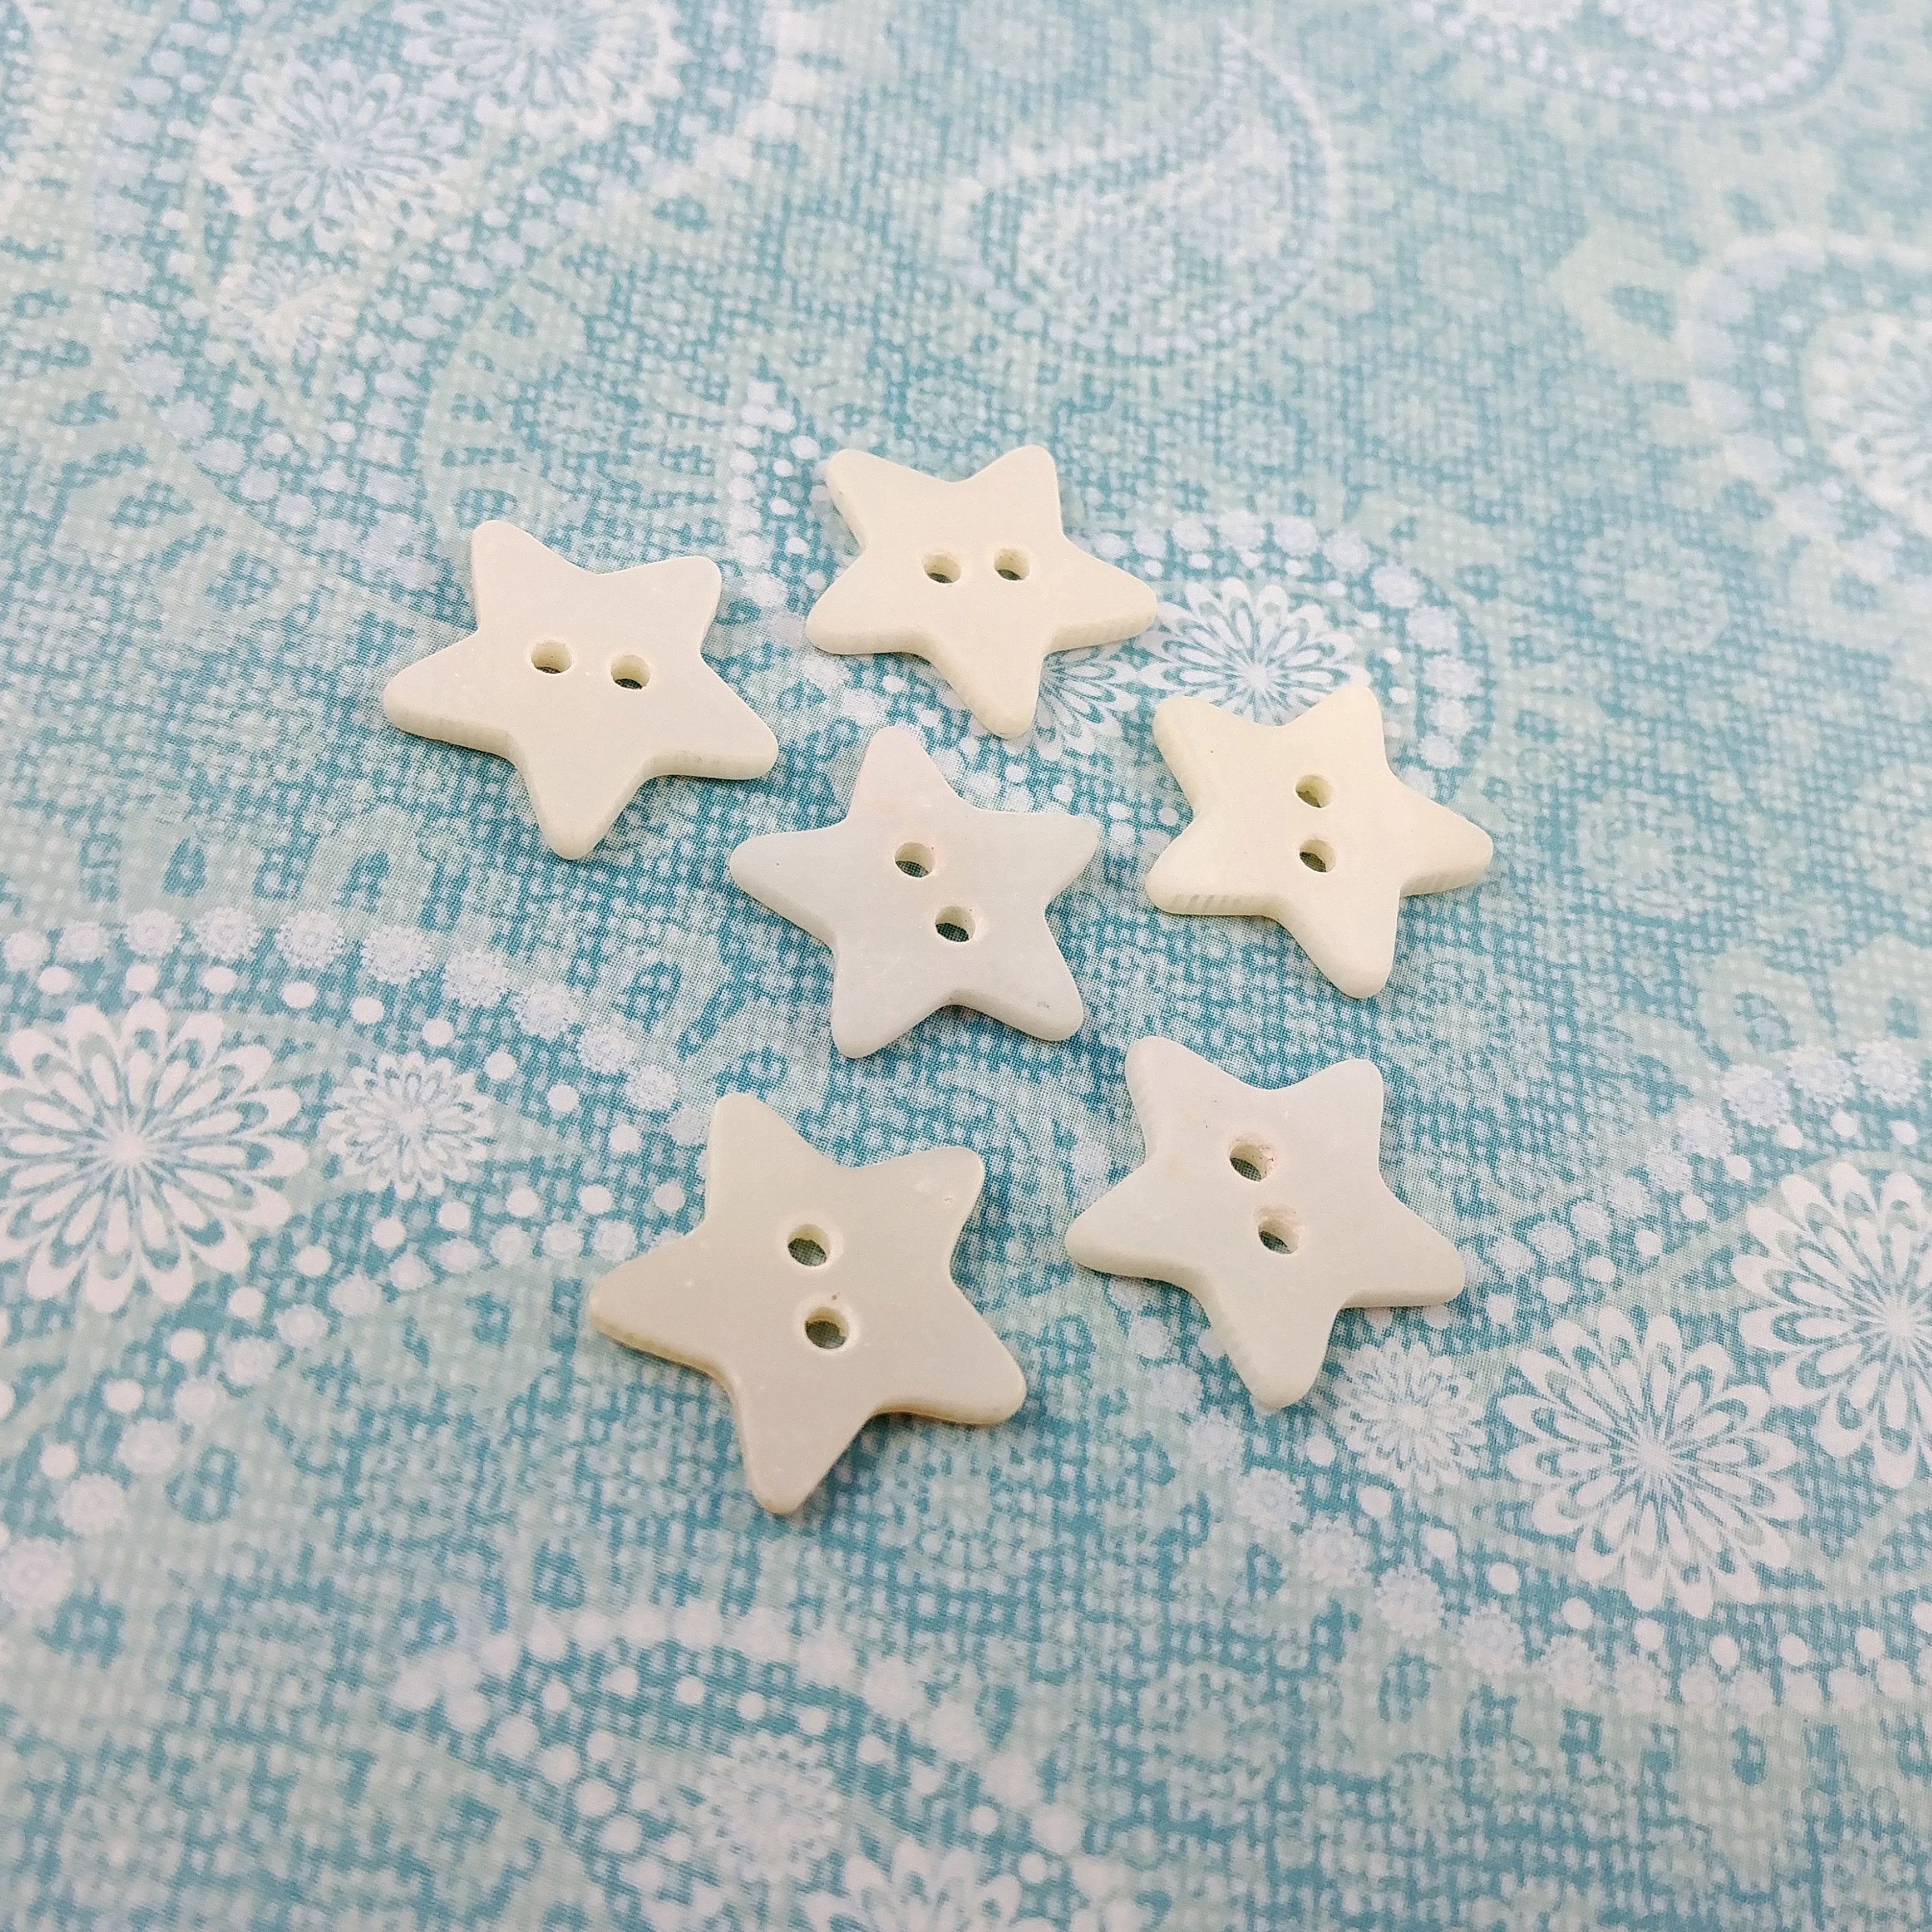 Mother of pearl natural shell buttons 15mm, set of 6 white star sewing buttons